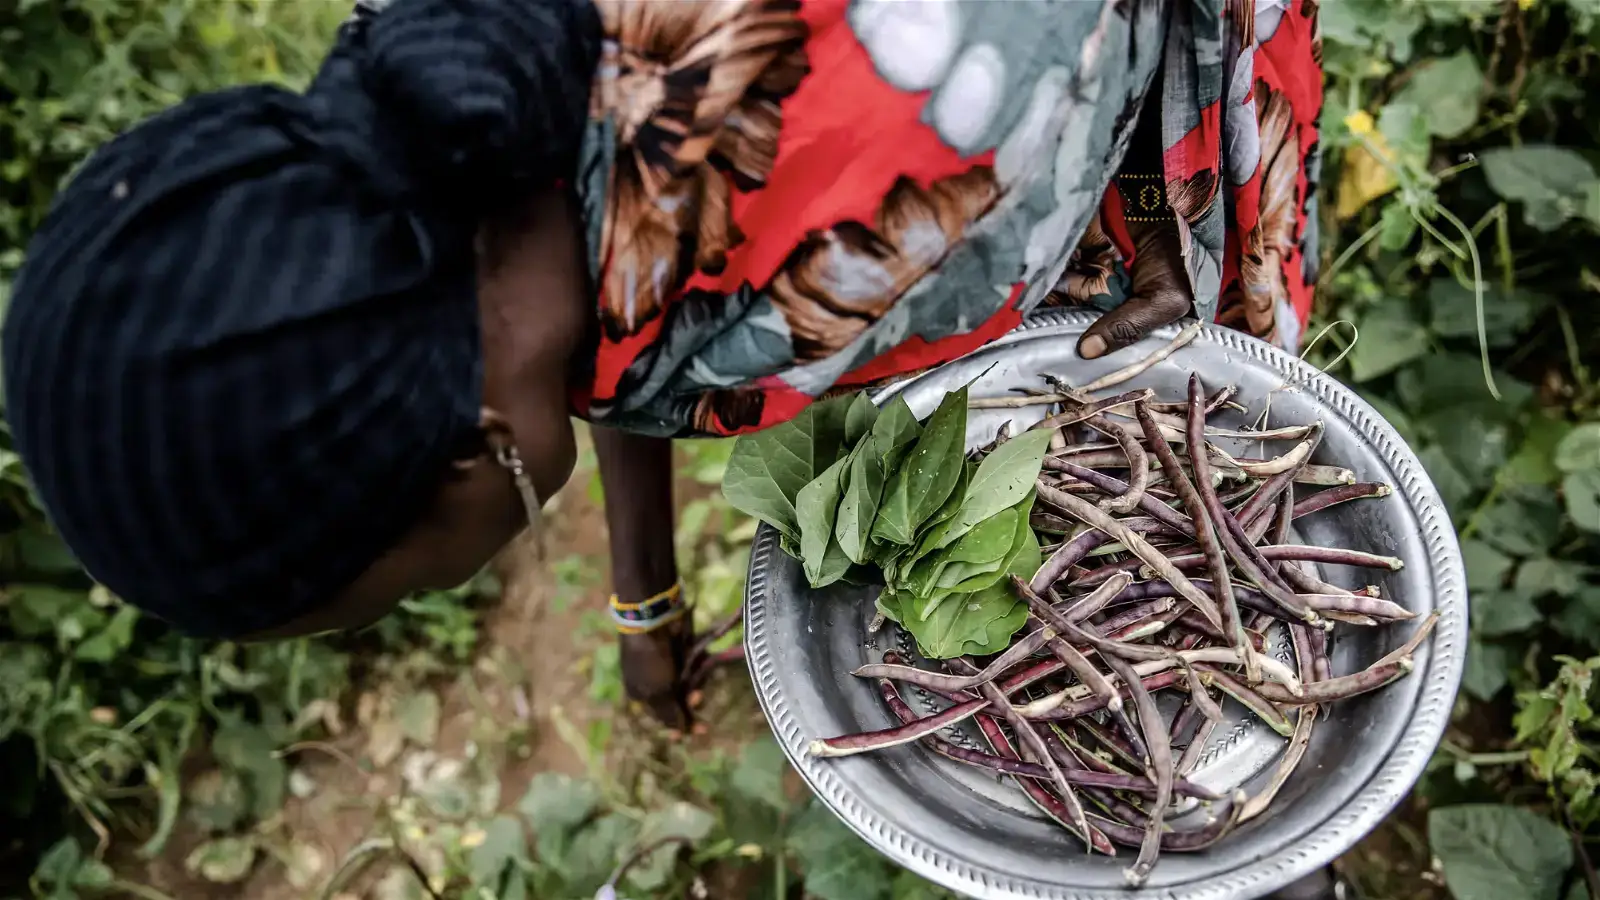 Hunger and hope: Africans tell of desperation and innovation as climate summit meets